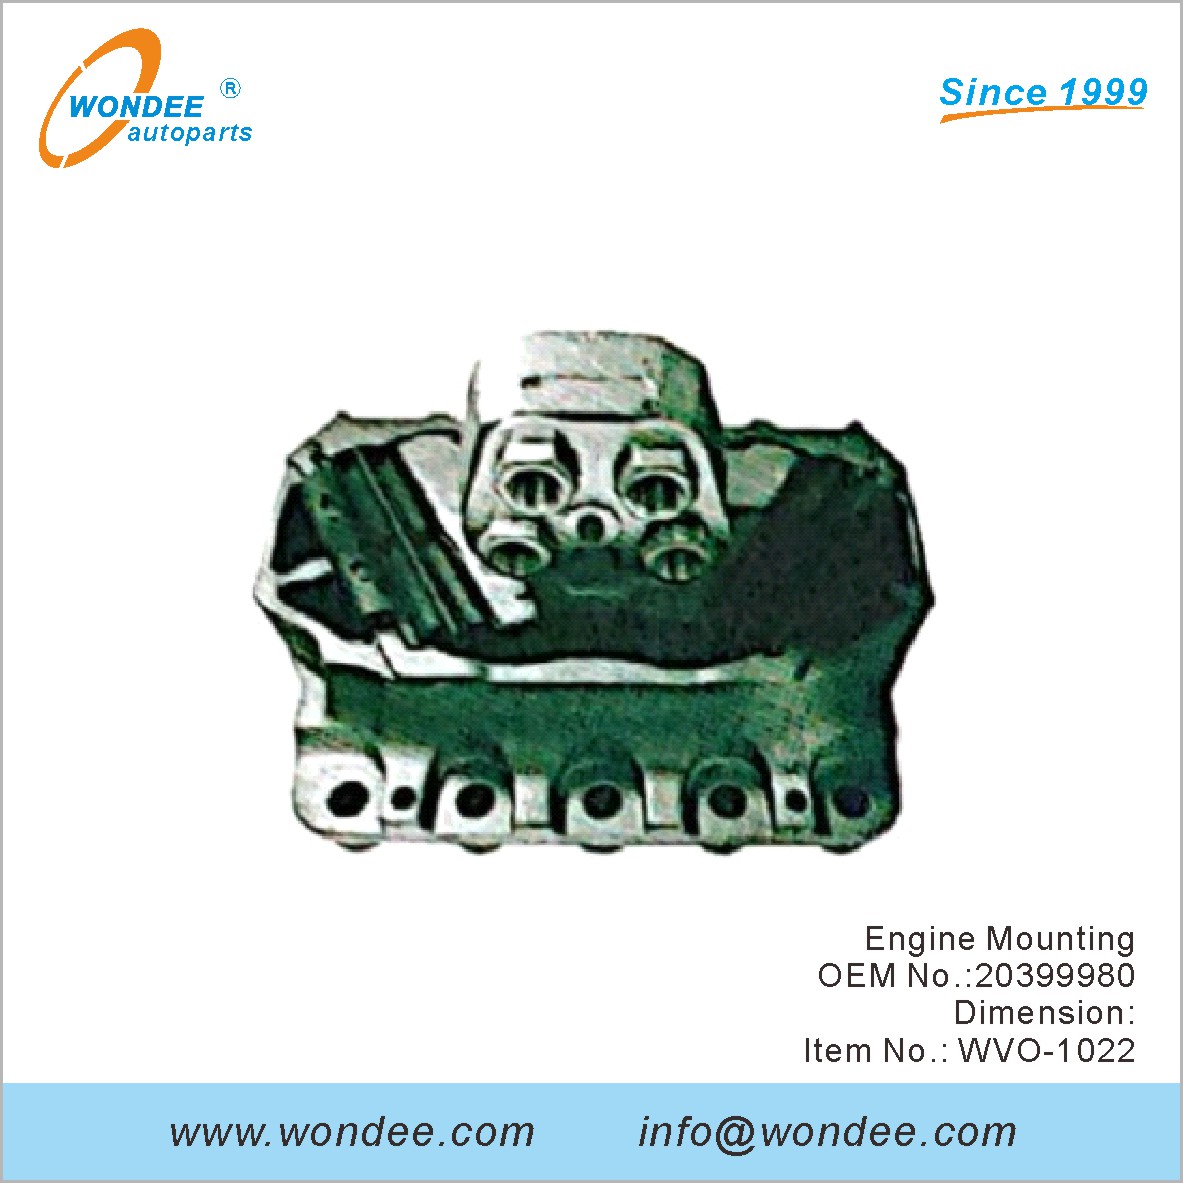 Engine Mounting OEM 20399980 for Volvo from WONDEE